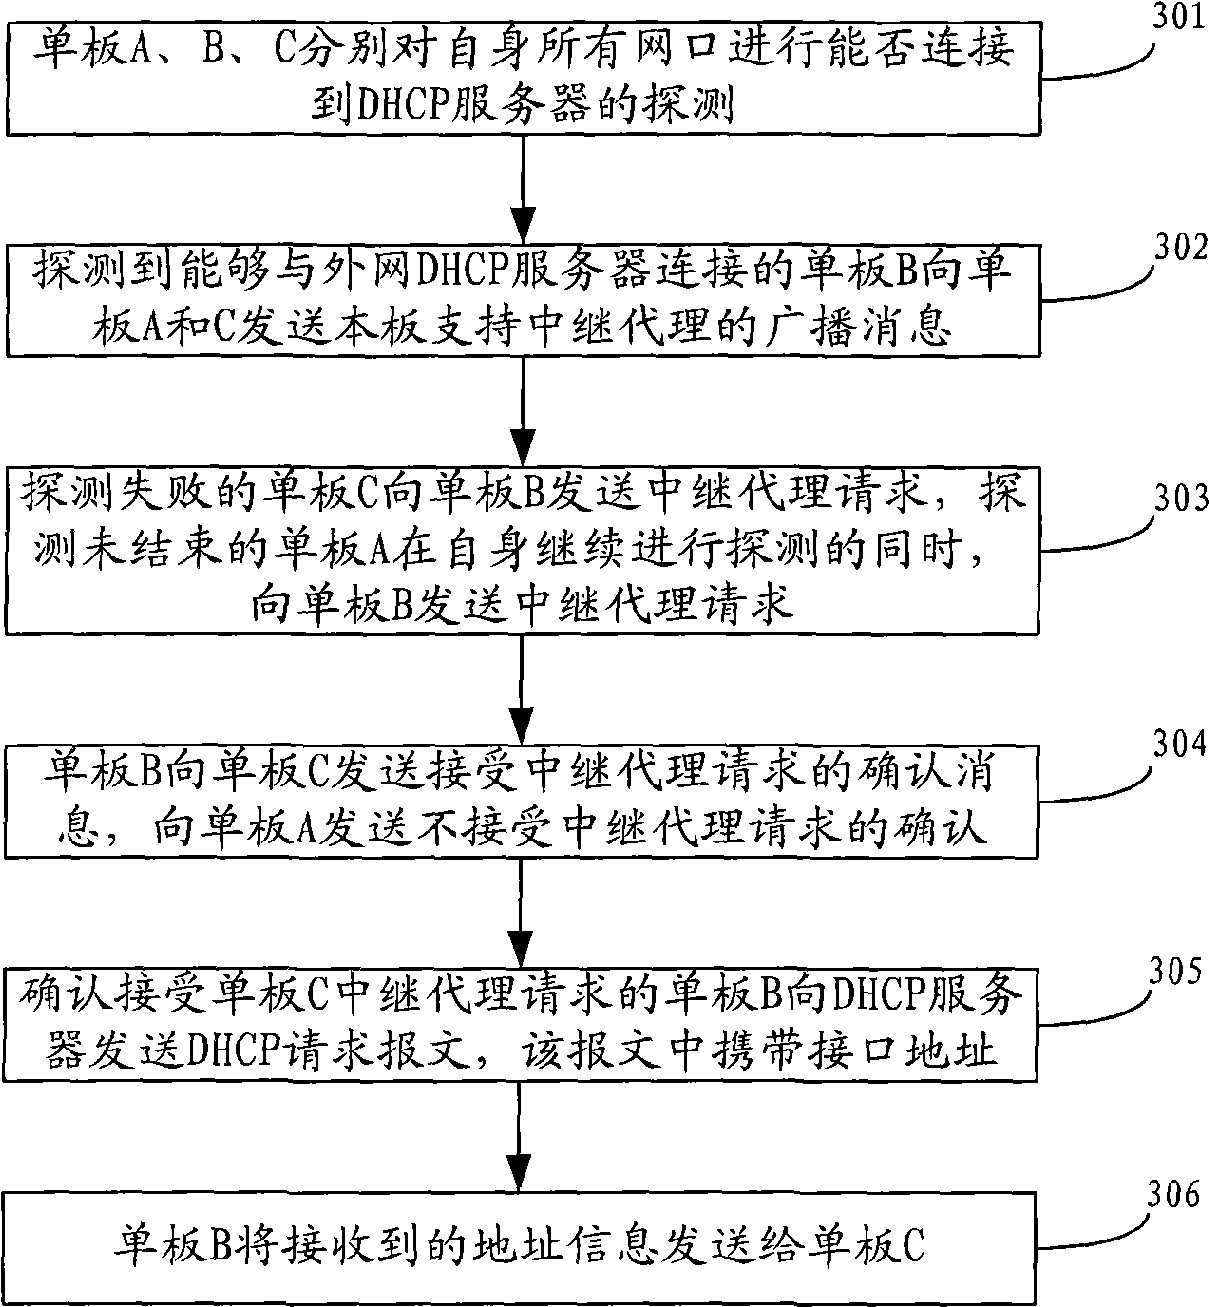 Relay agent generation method, single boards and network equipment